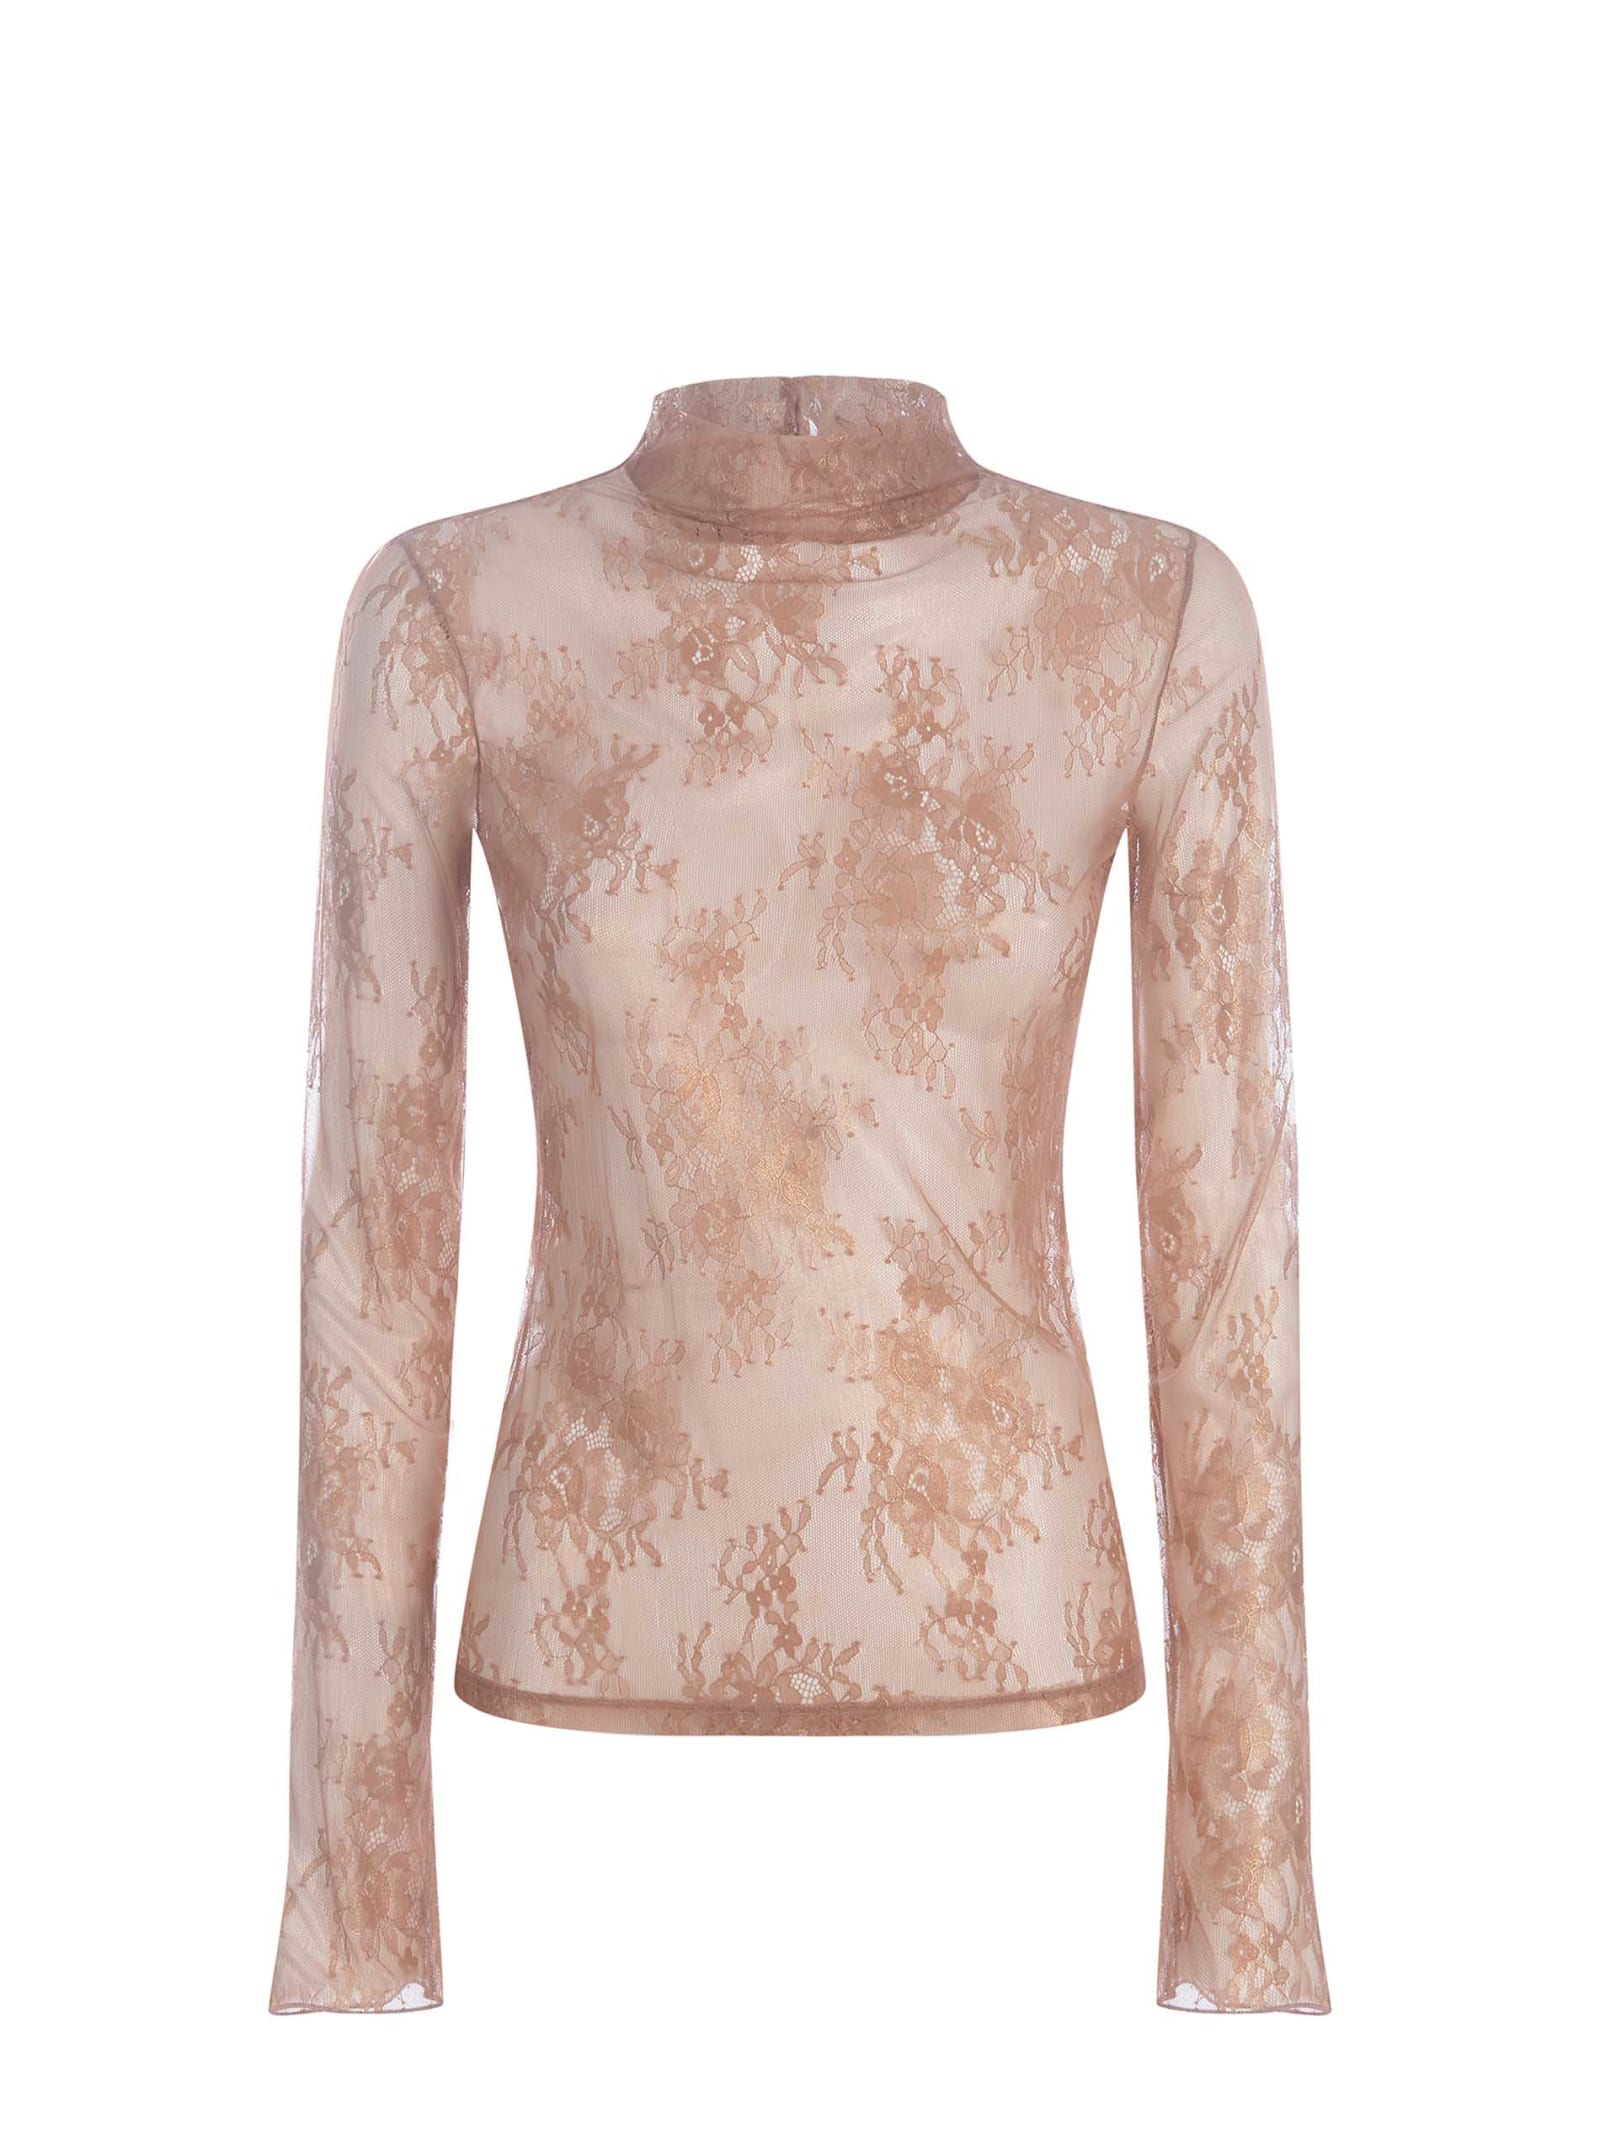 Traminer Lace Long Sleeves Top